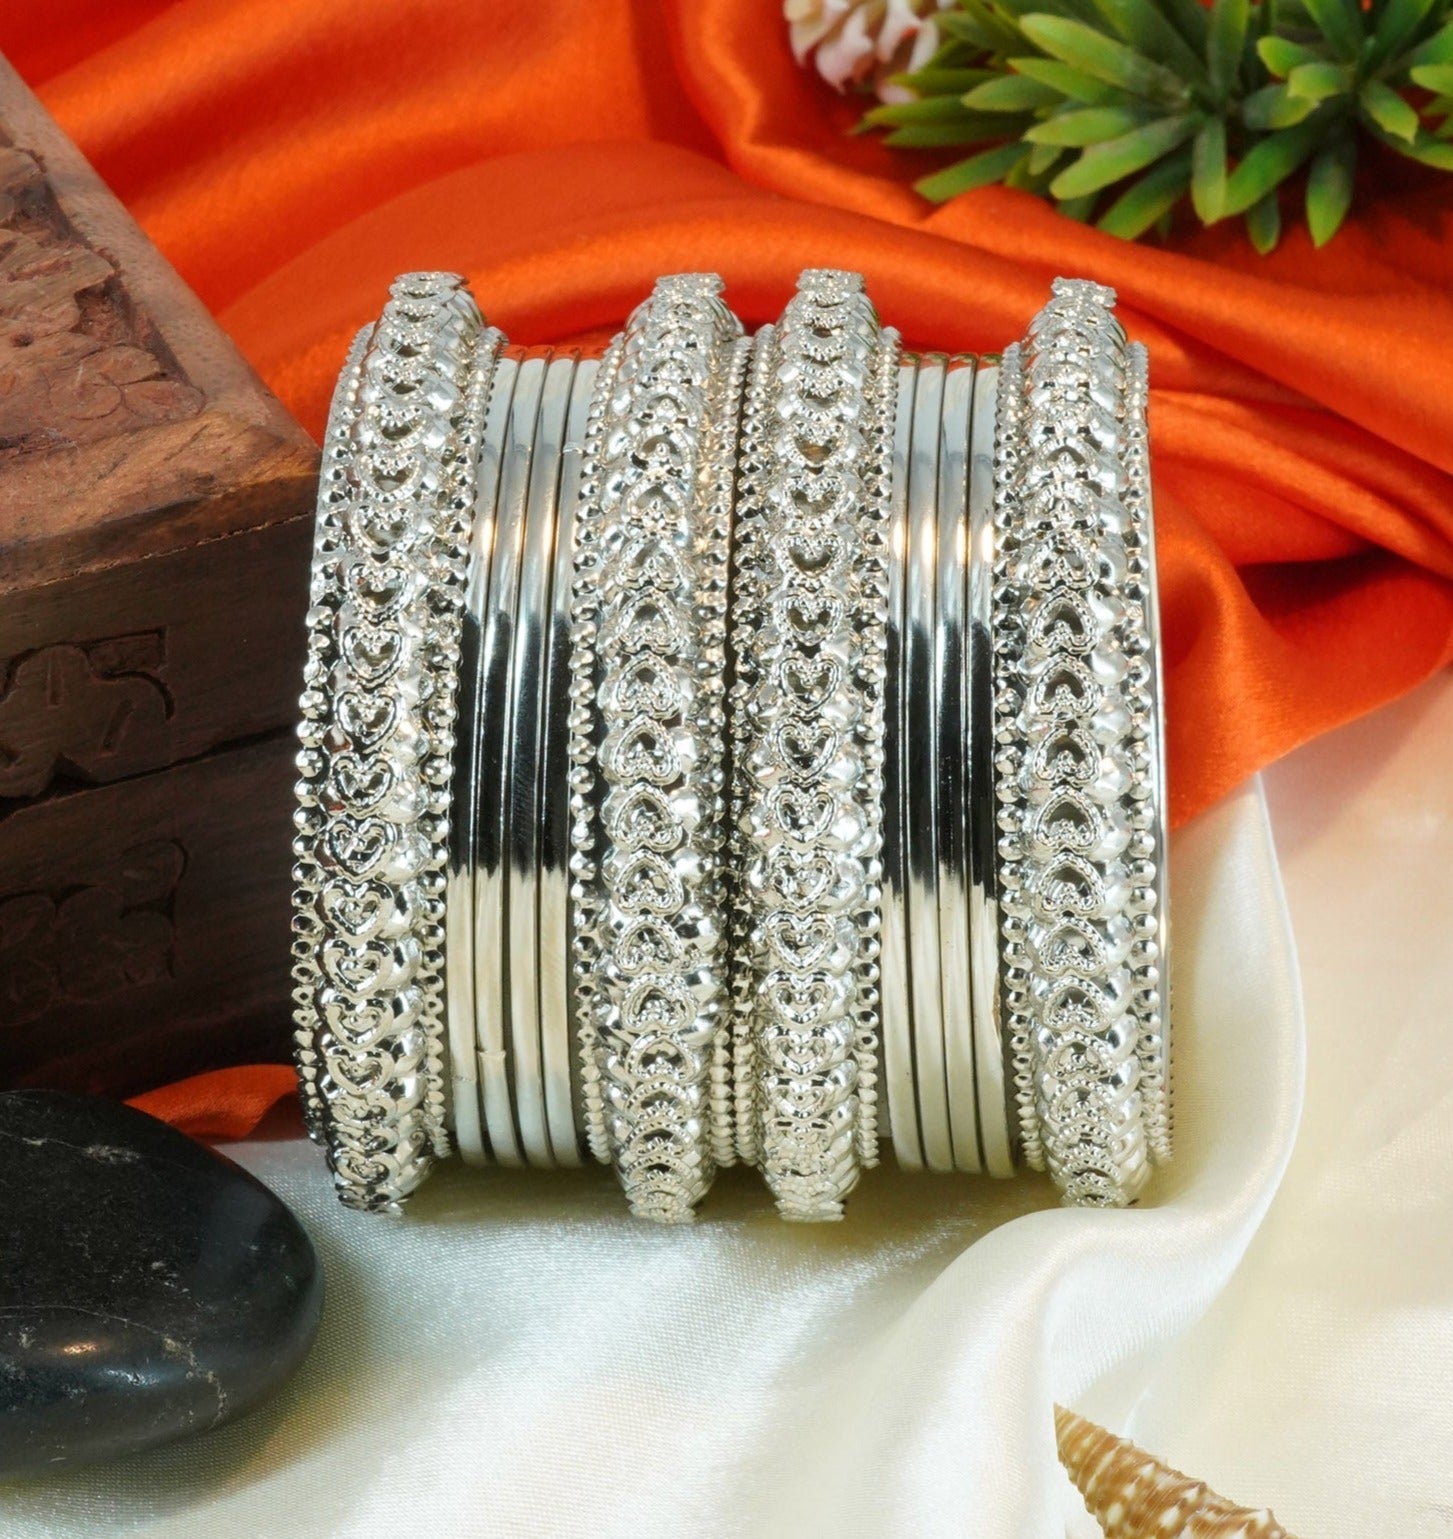 Fancy Silver Plated Bangles Set of 12 bangles 11455K